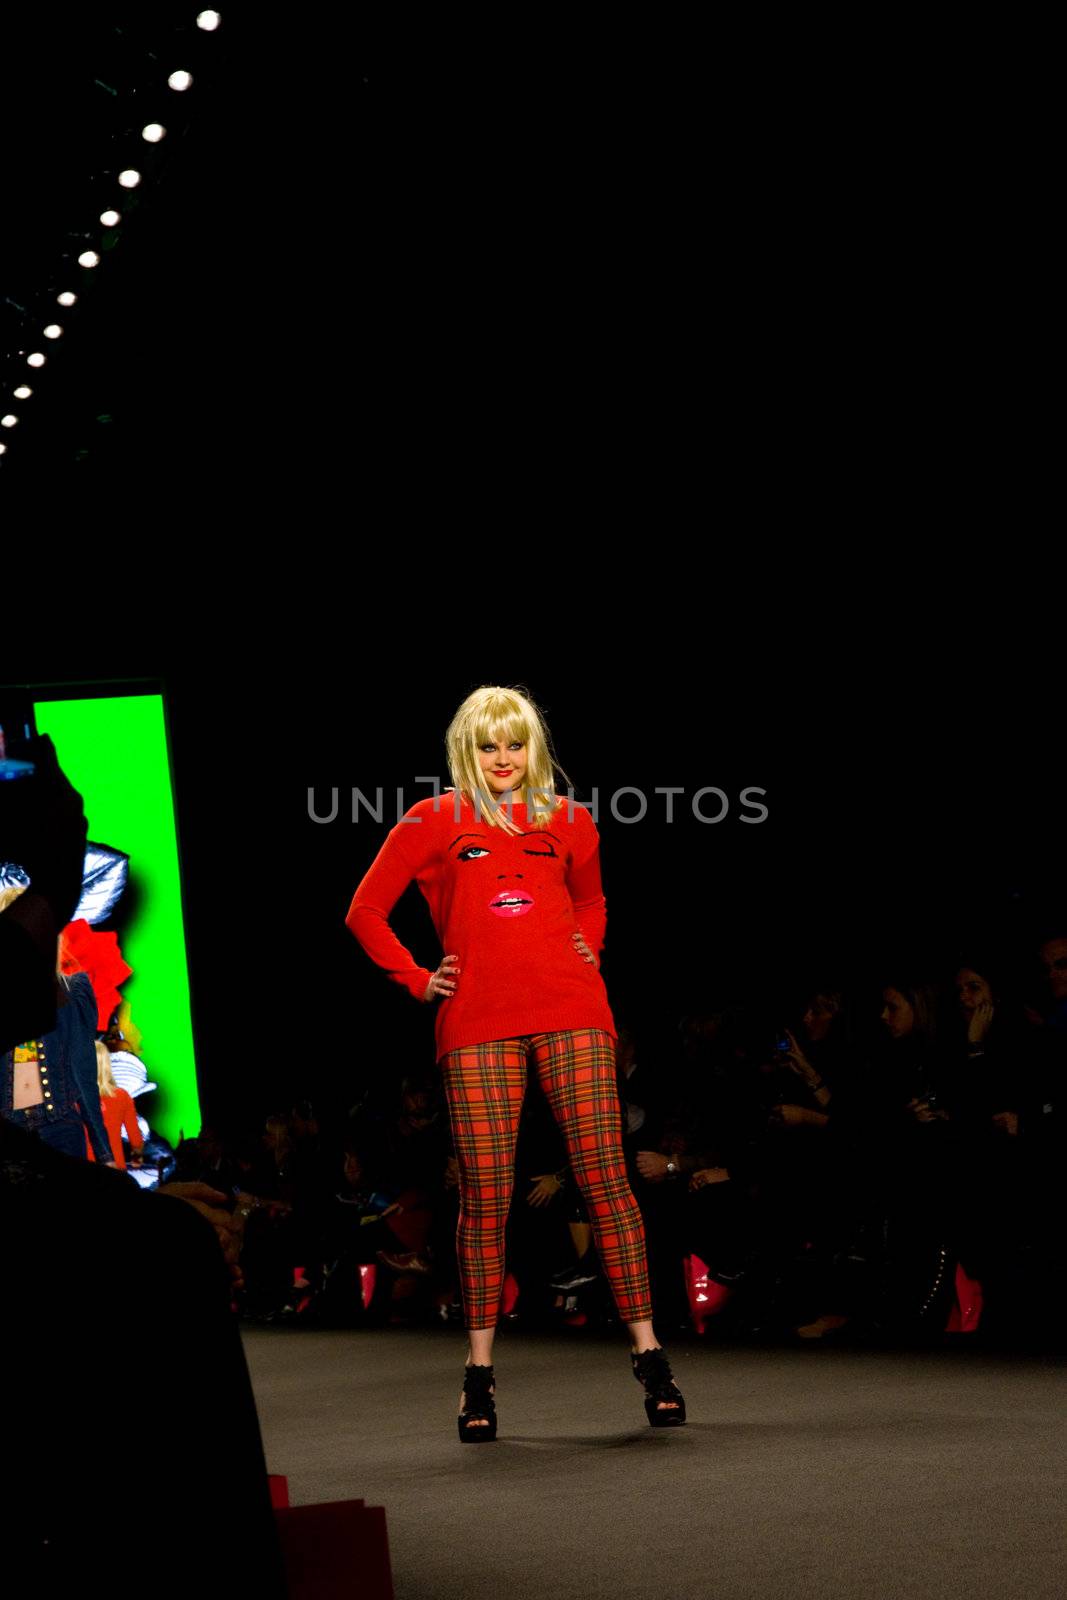 NEW YORK, NY - FEBRUARY 14: A model/coworker walks the runway at the Betsey Johnson Fall 2011 fashion show during Mercedes-Benz Fashion Week at The Theatre at Lincoln Center on February 14, 2011 in New York City. (Photo by Diana Beato)